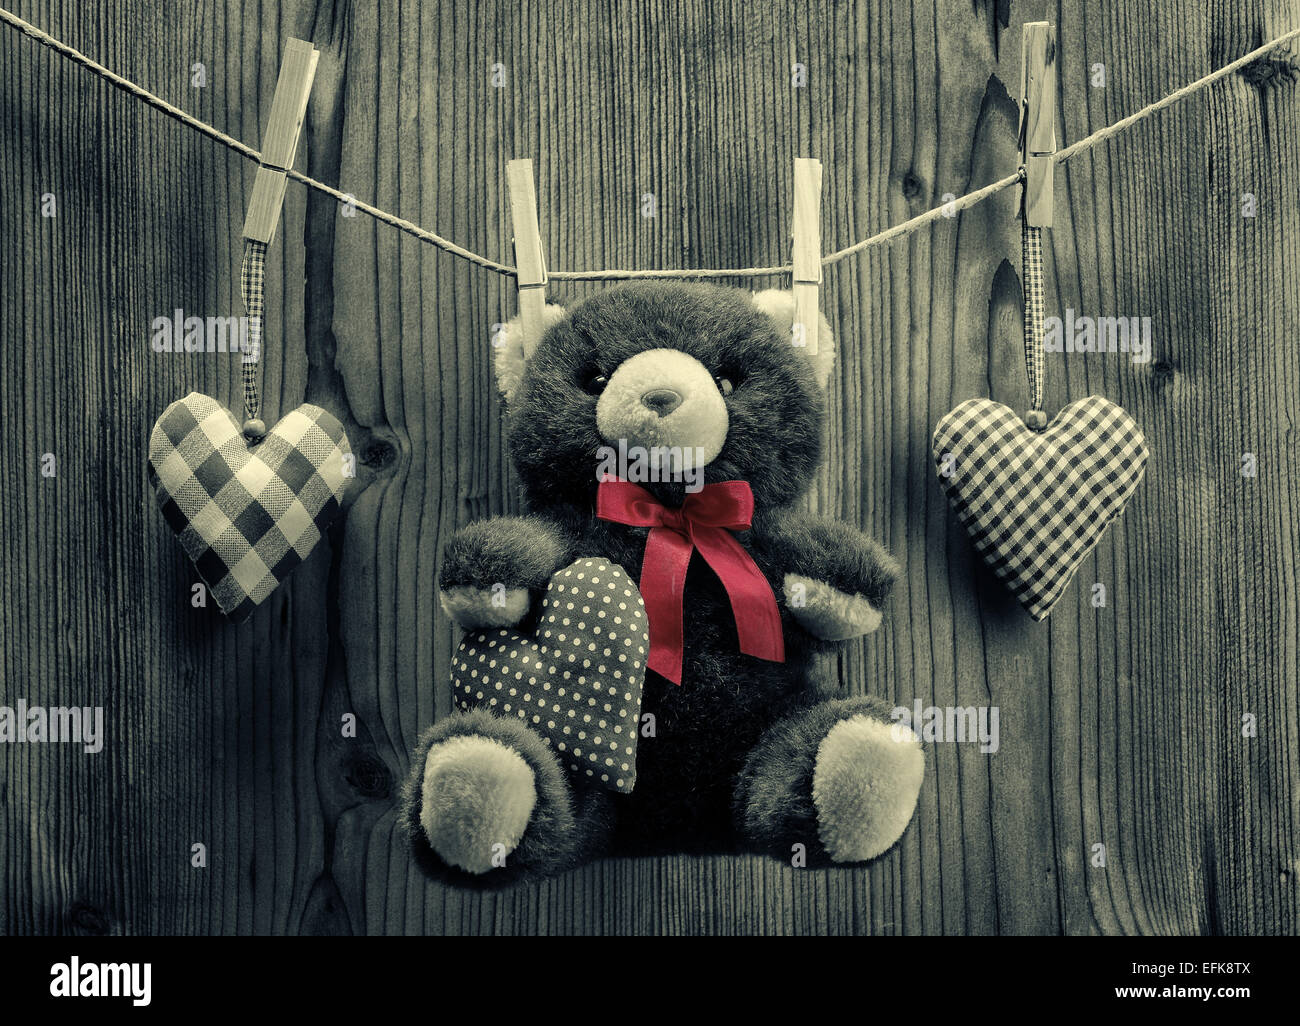 Valentine's Day wallpaper - Teddy Bear hanging with textile hearts ...